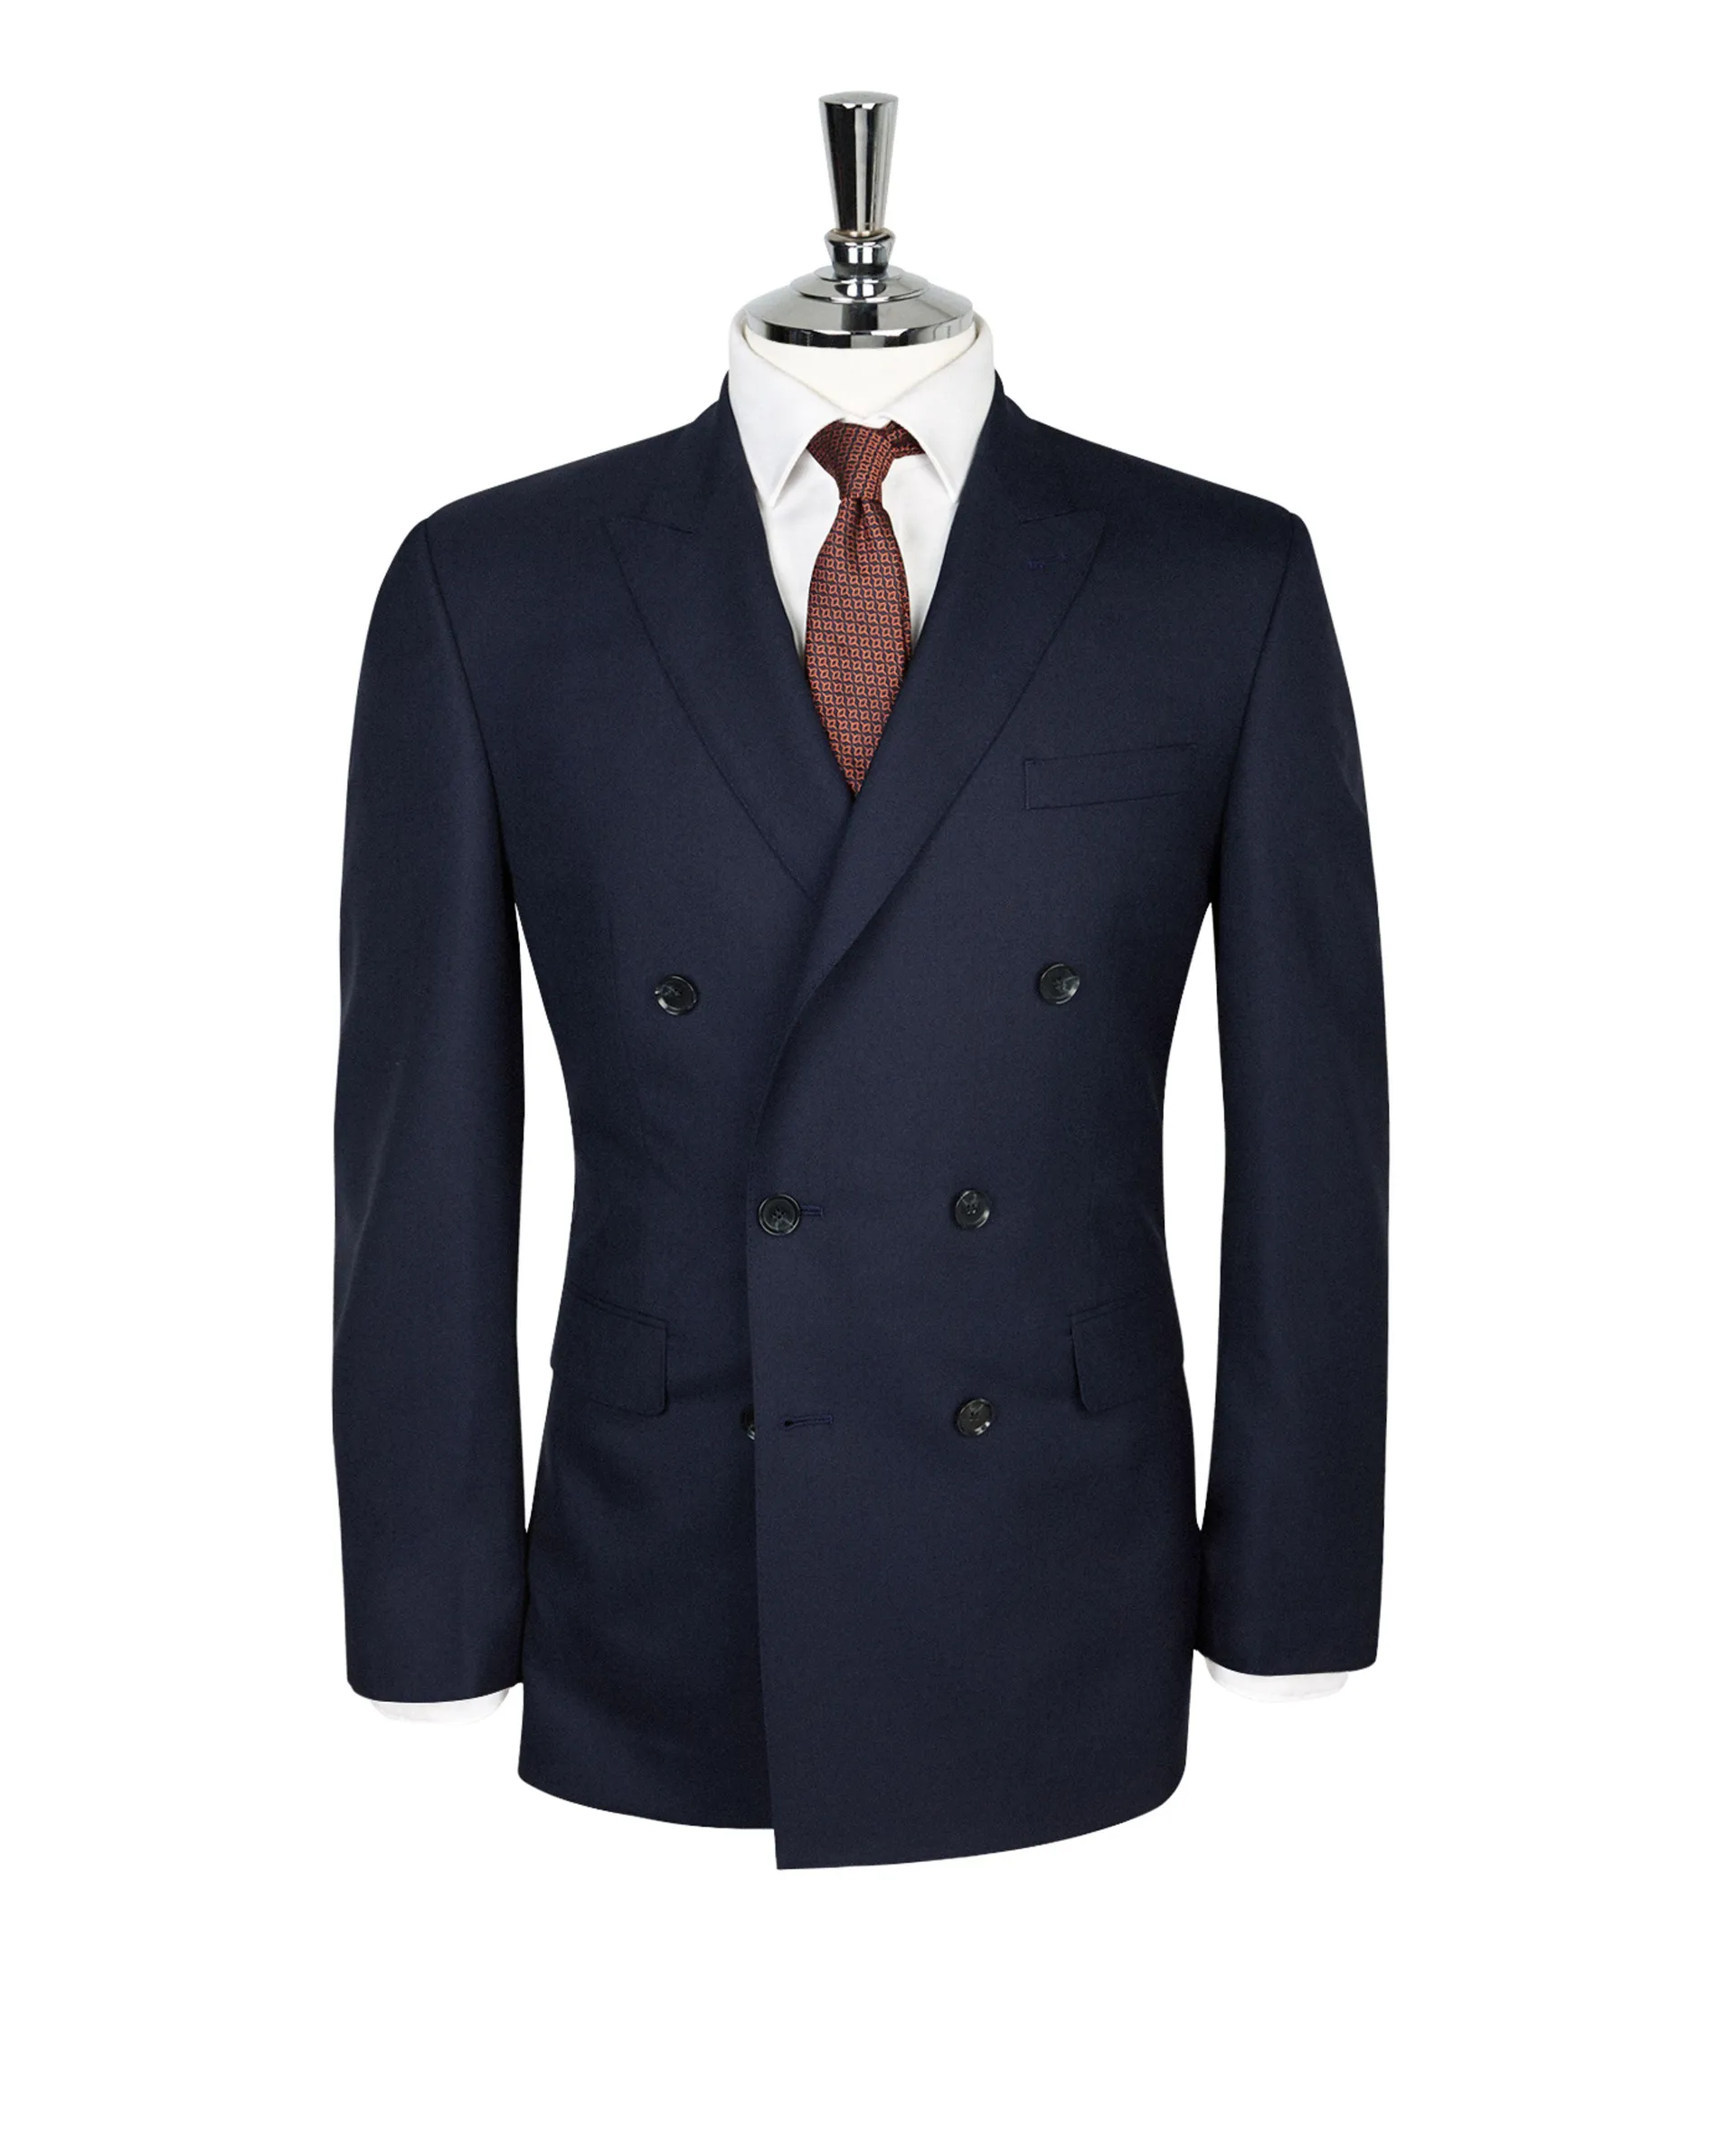 Fitzrovia Barberis Slim Fit Double-Breasted Navy Jacket